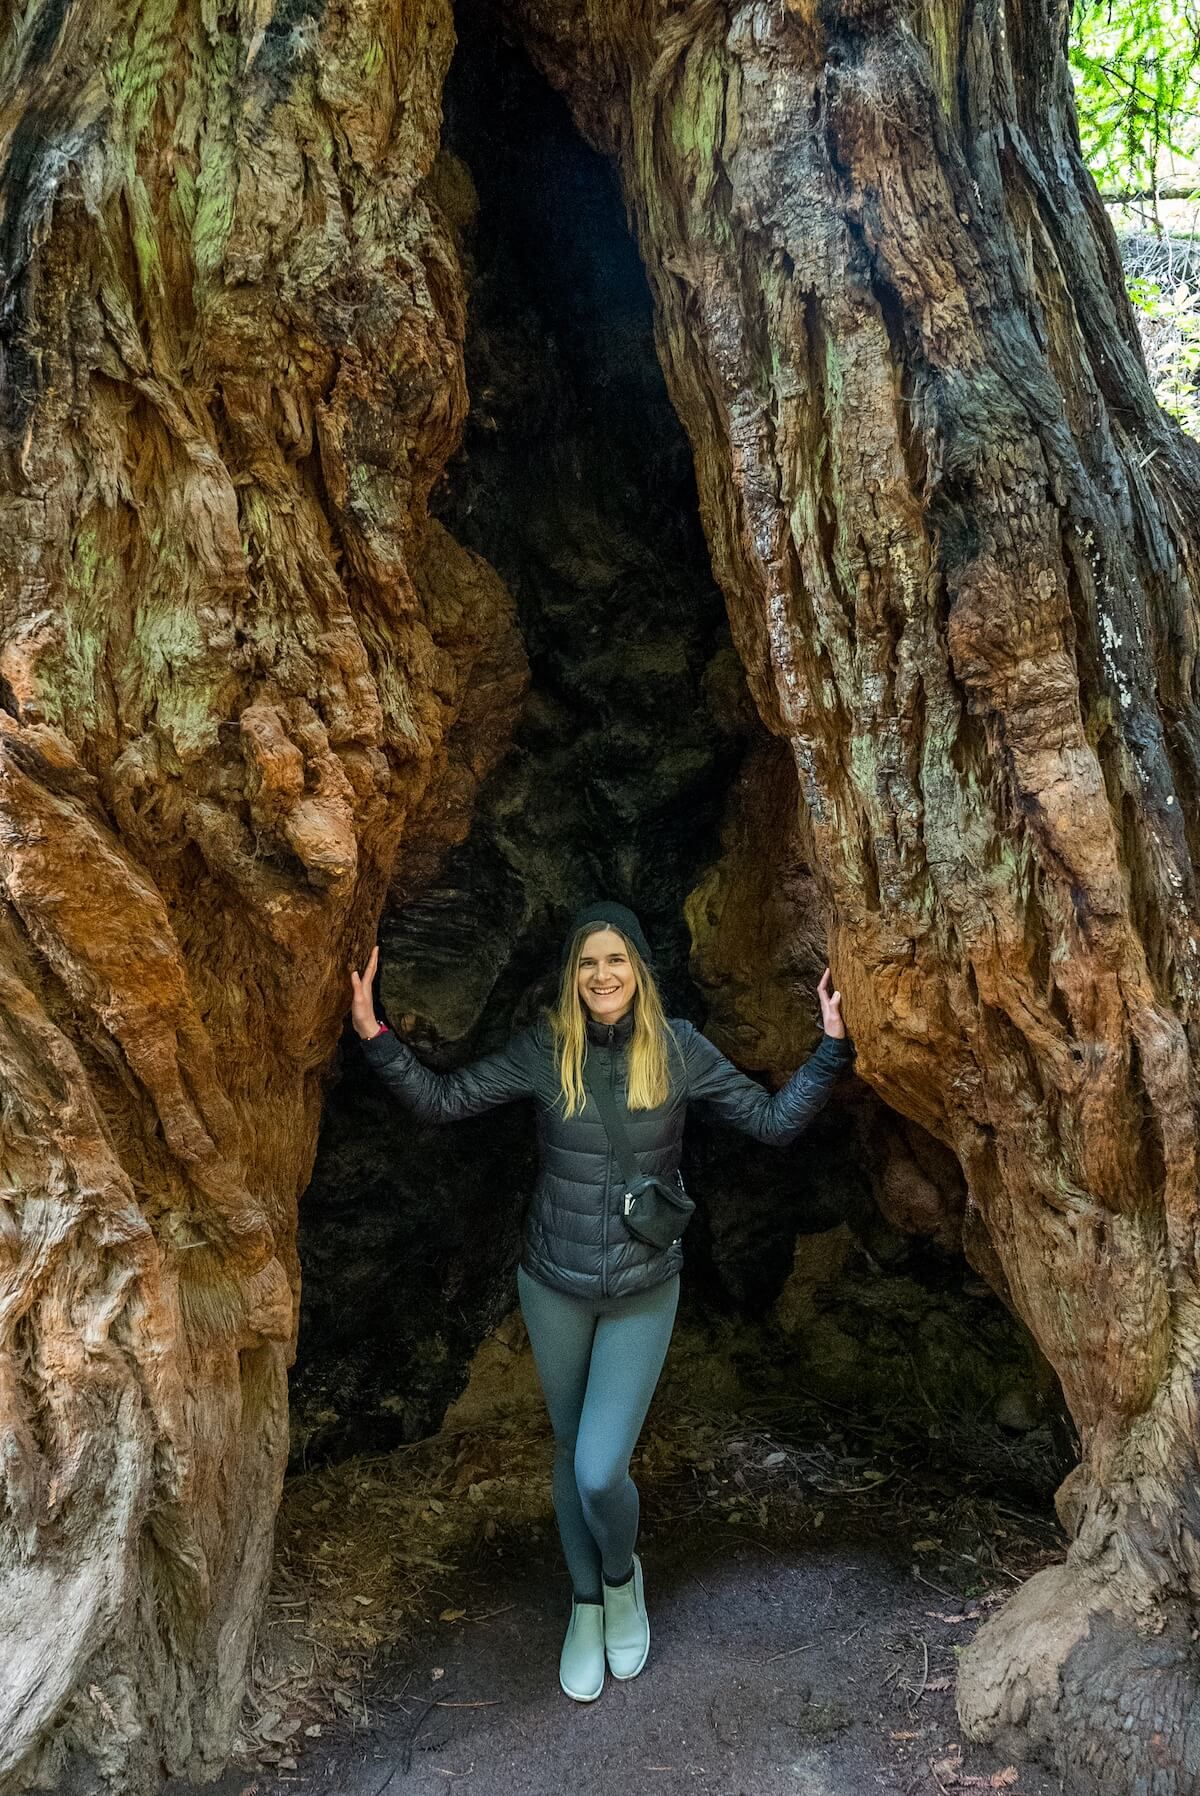 A woman stands inside an alcove in a massive redwood tree in Muir Woods National Monument, smiling at the camera.